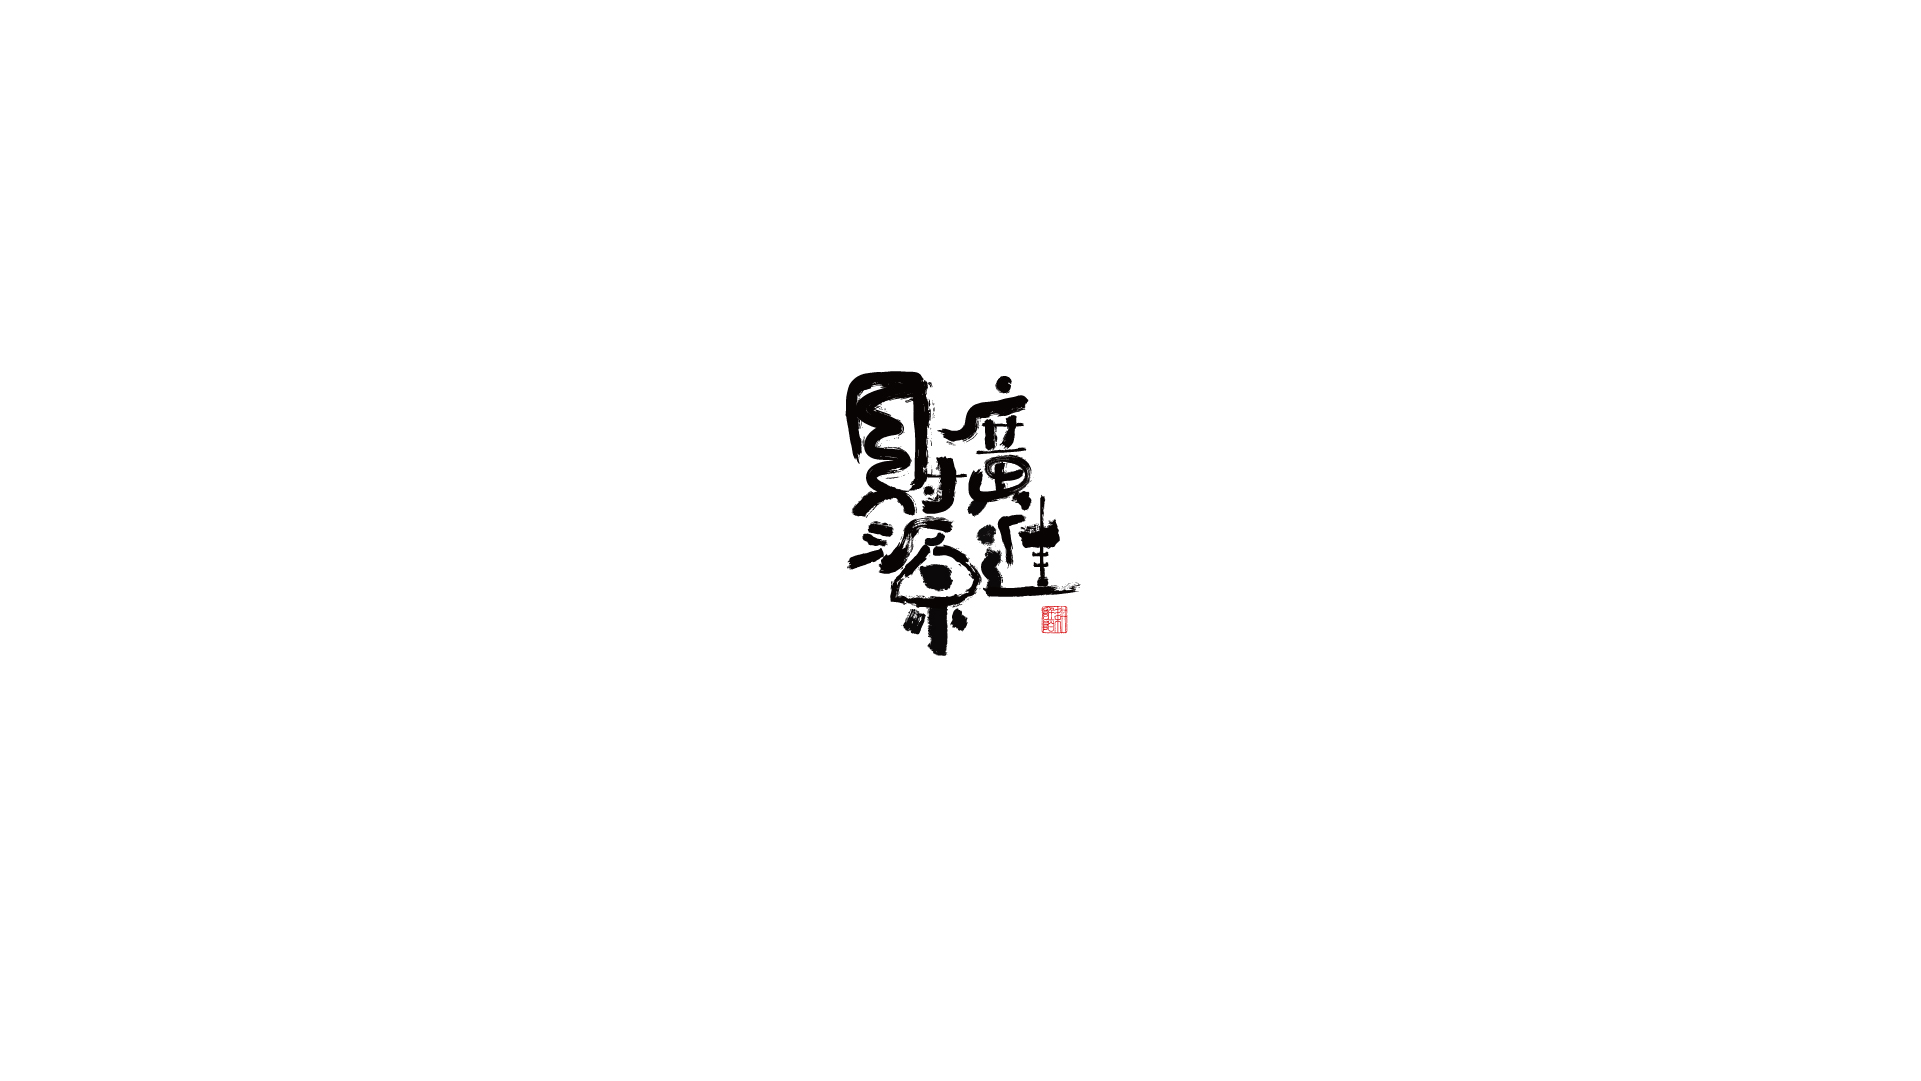 13P Collection of the latest Chinese font design schemes in 2021 #.627